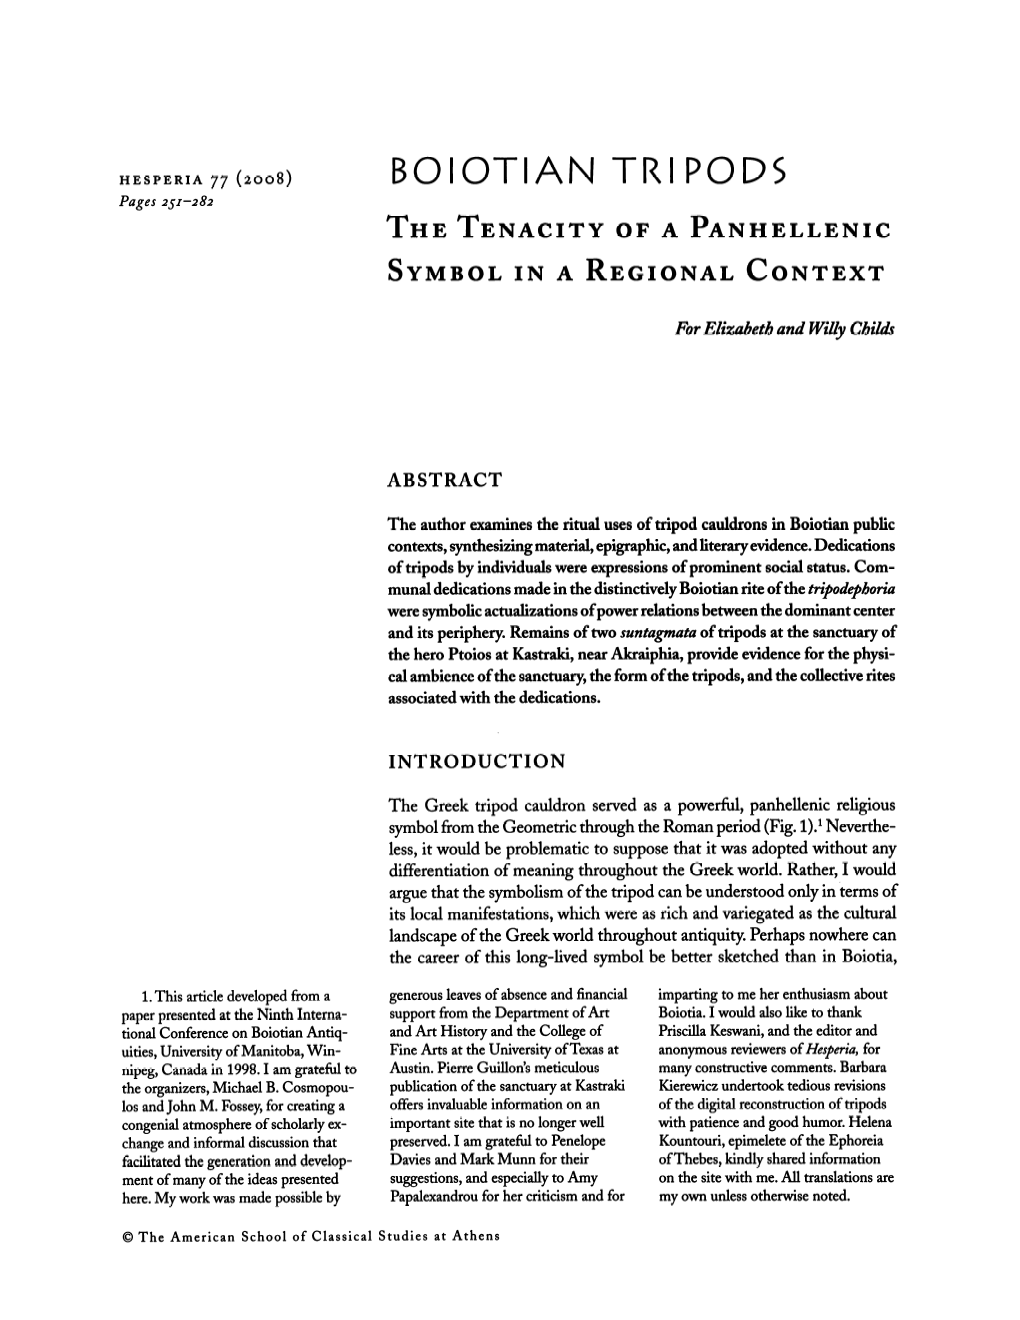 BOIOTIAN TRIPODS Pages 251-282 the Tenacity of a Panhellenic Symbol in a Regional Context